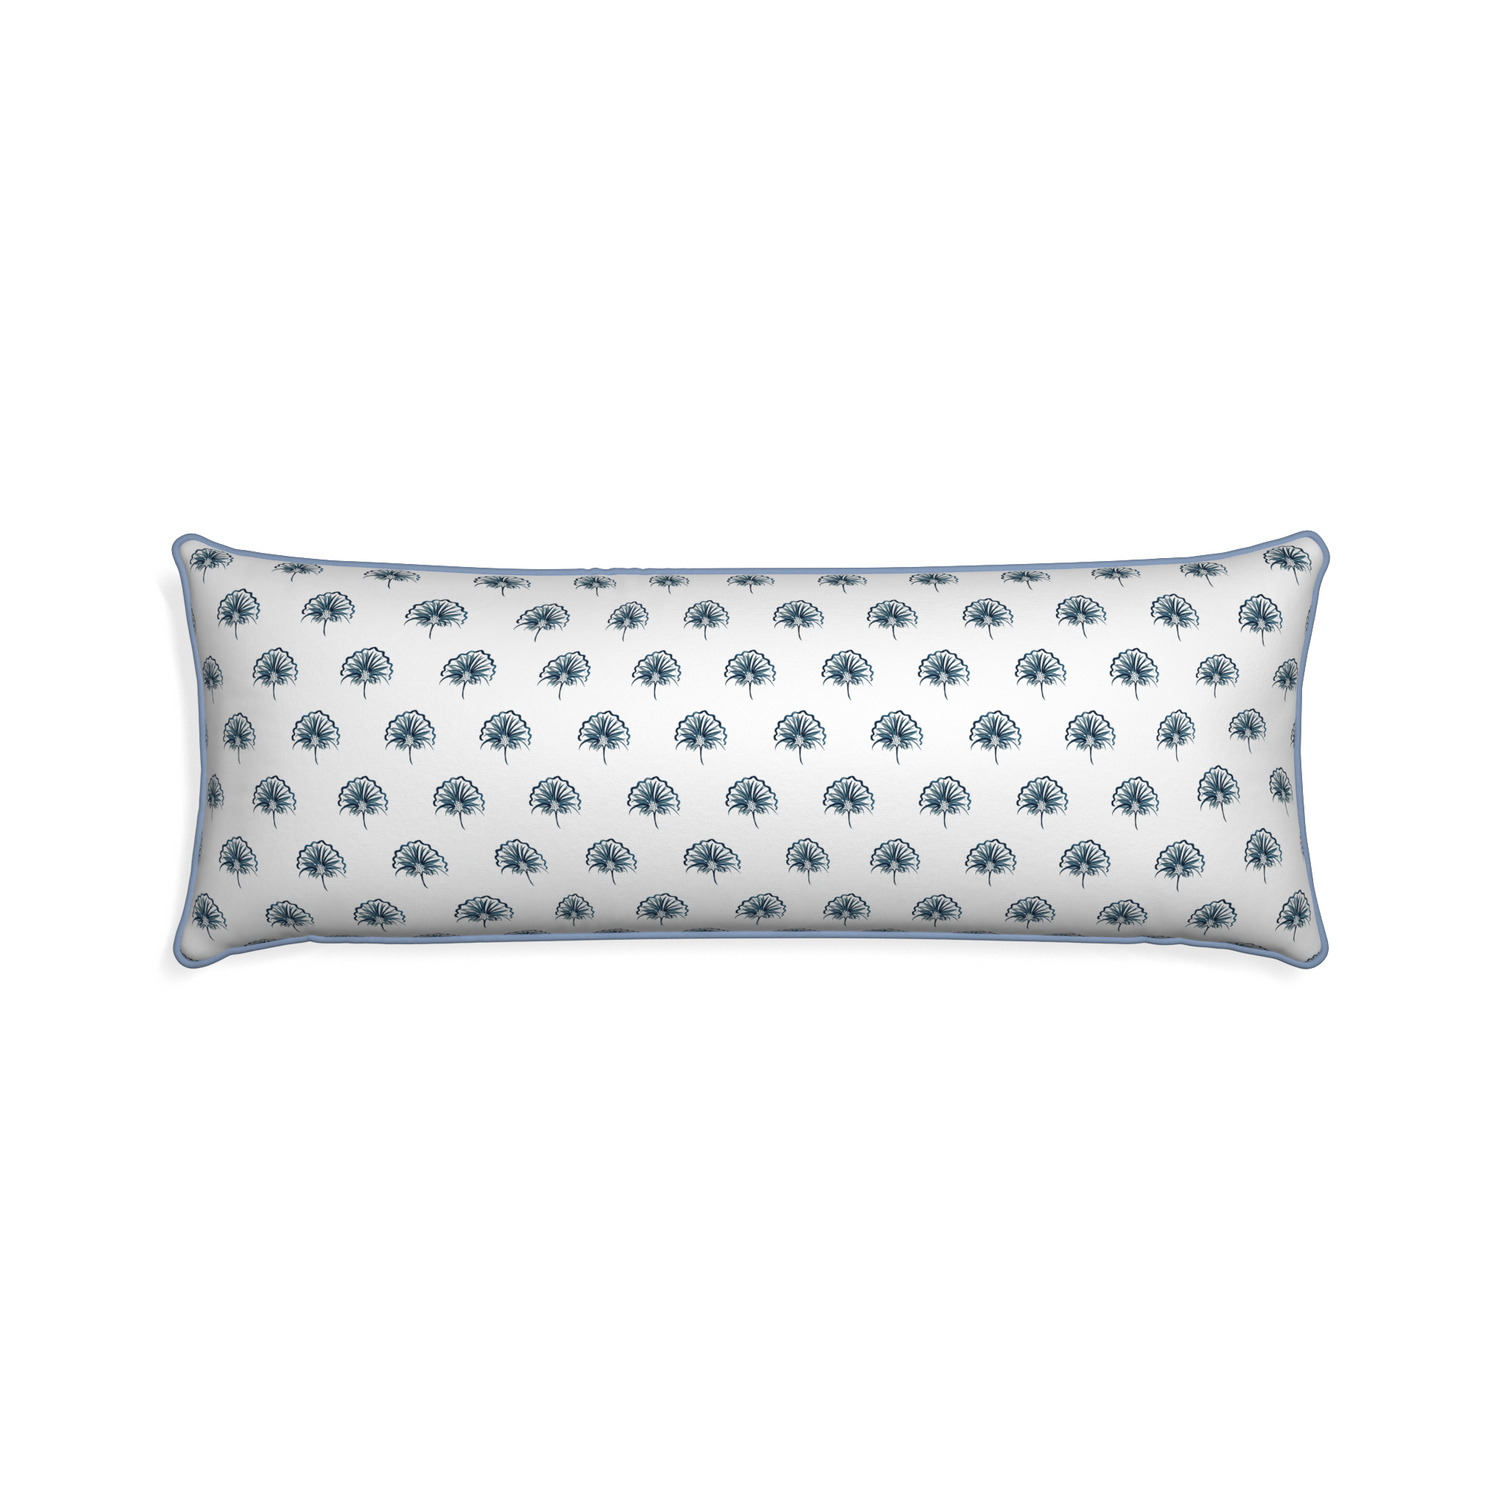 Xl-lumbar penelope midnight custom pillow with sky piping on white background